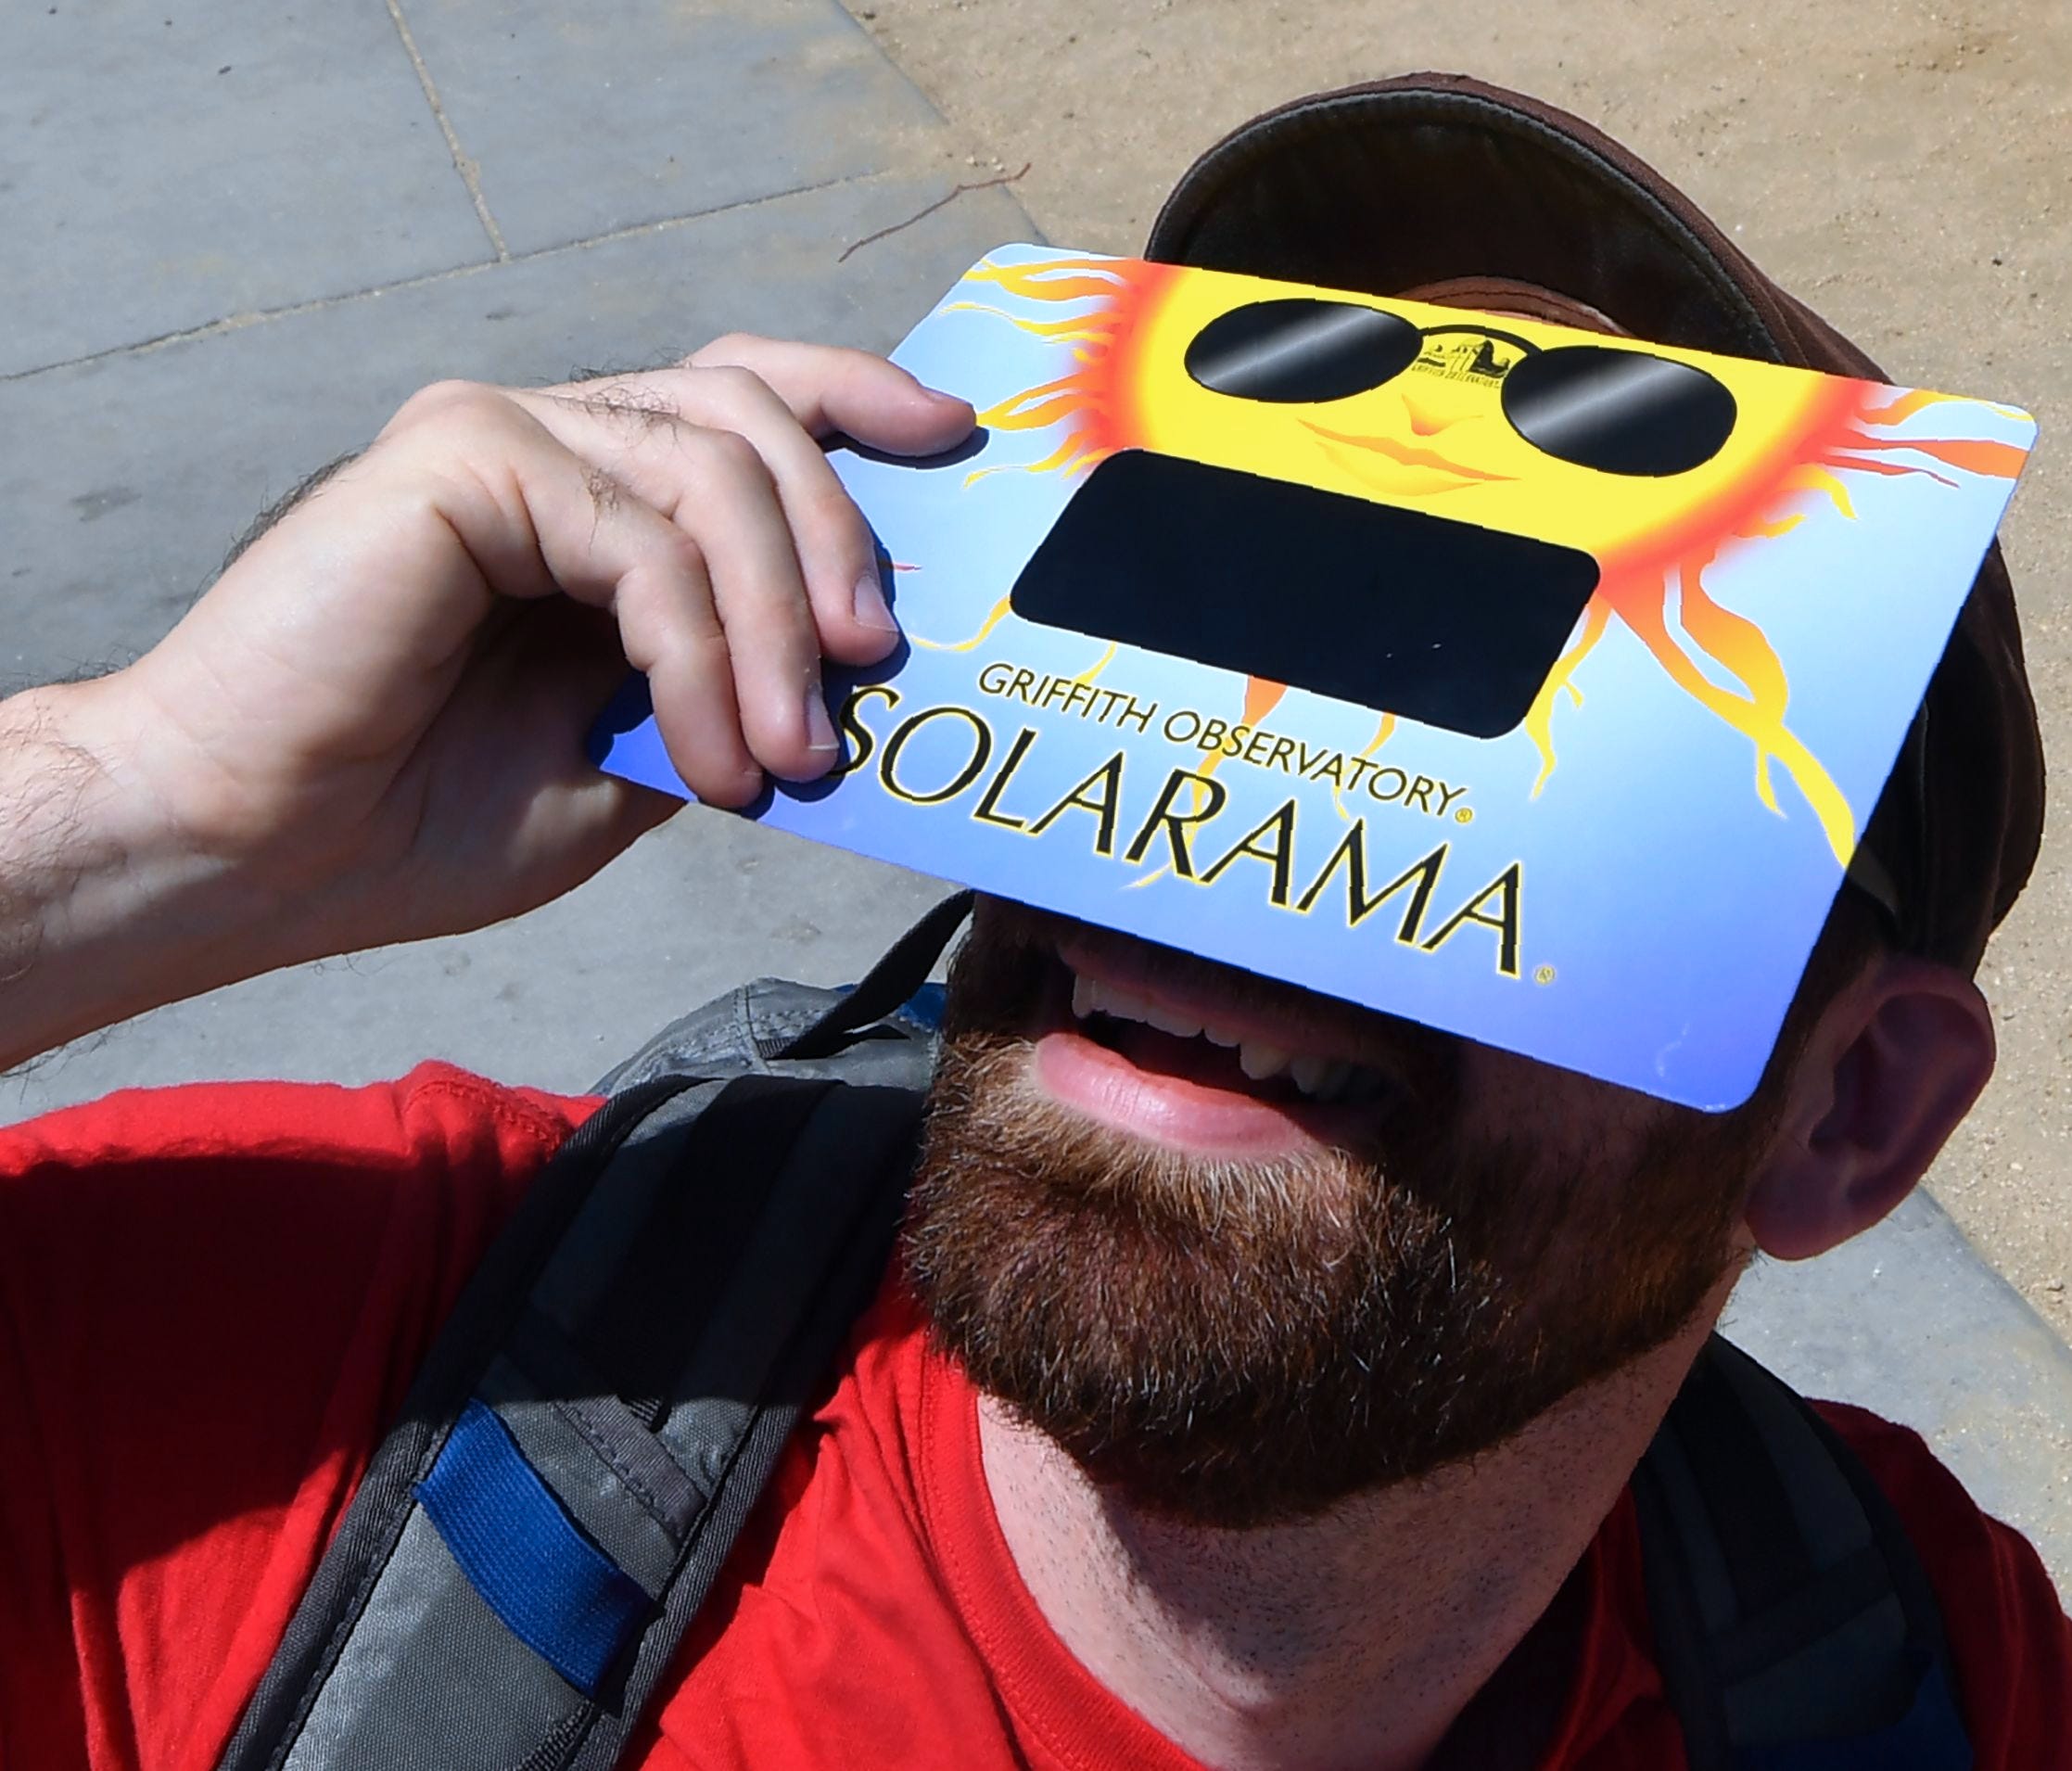 Daniel Rossman takes a look at the sun with solar eclipse glasses during the Solar Eclipse Festival at the California Science Center in Los Angeles, California, on Aug. 19, 2017, two days before The Solar Eclipse on Aug. 21.